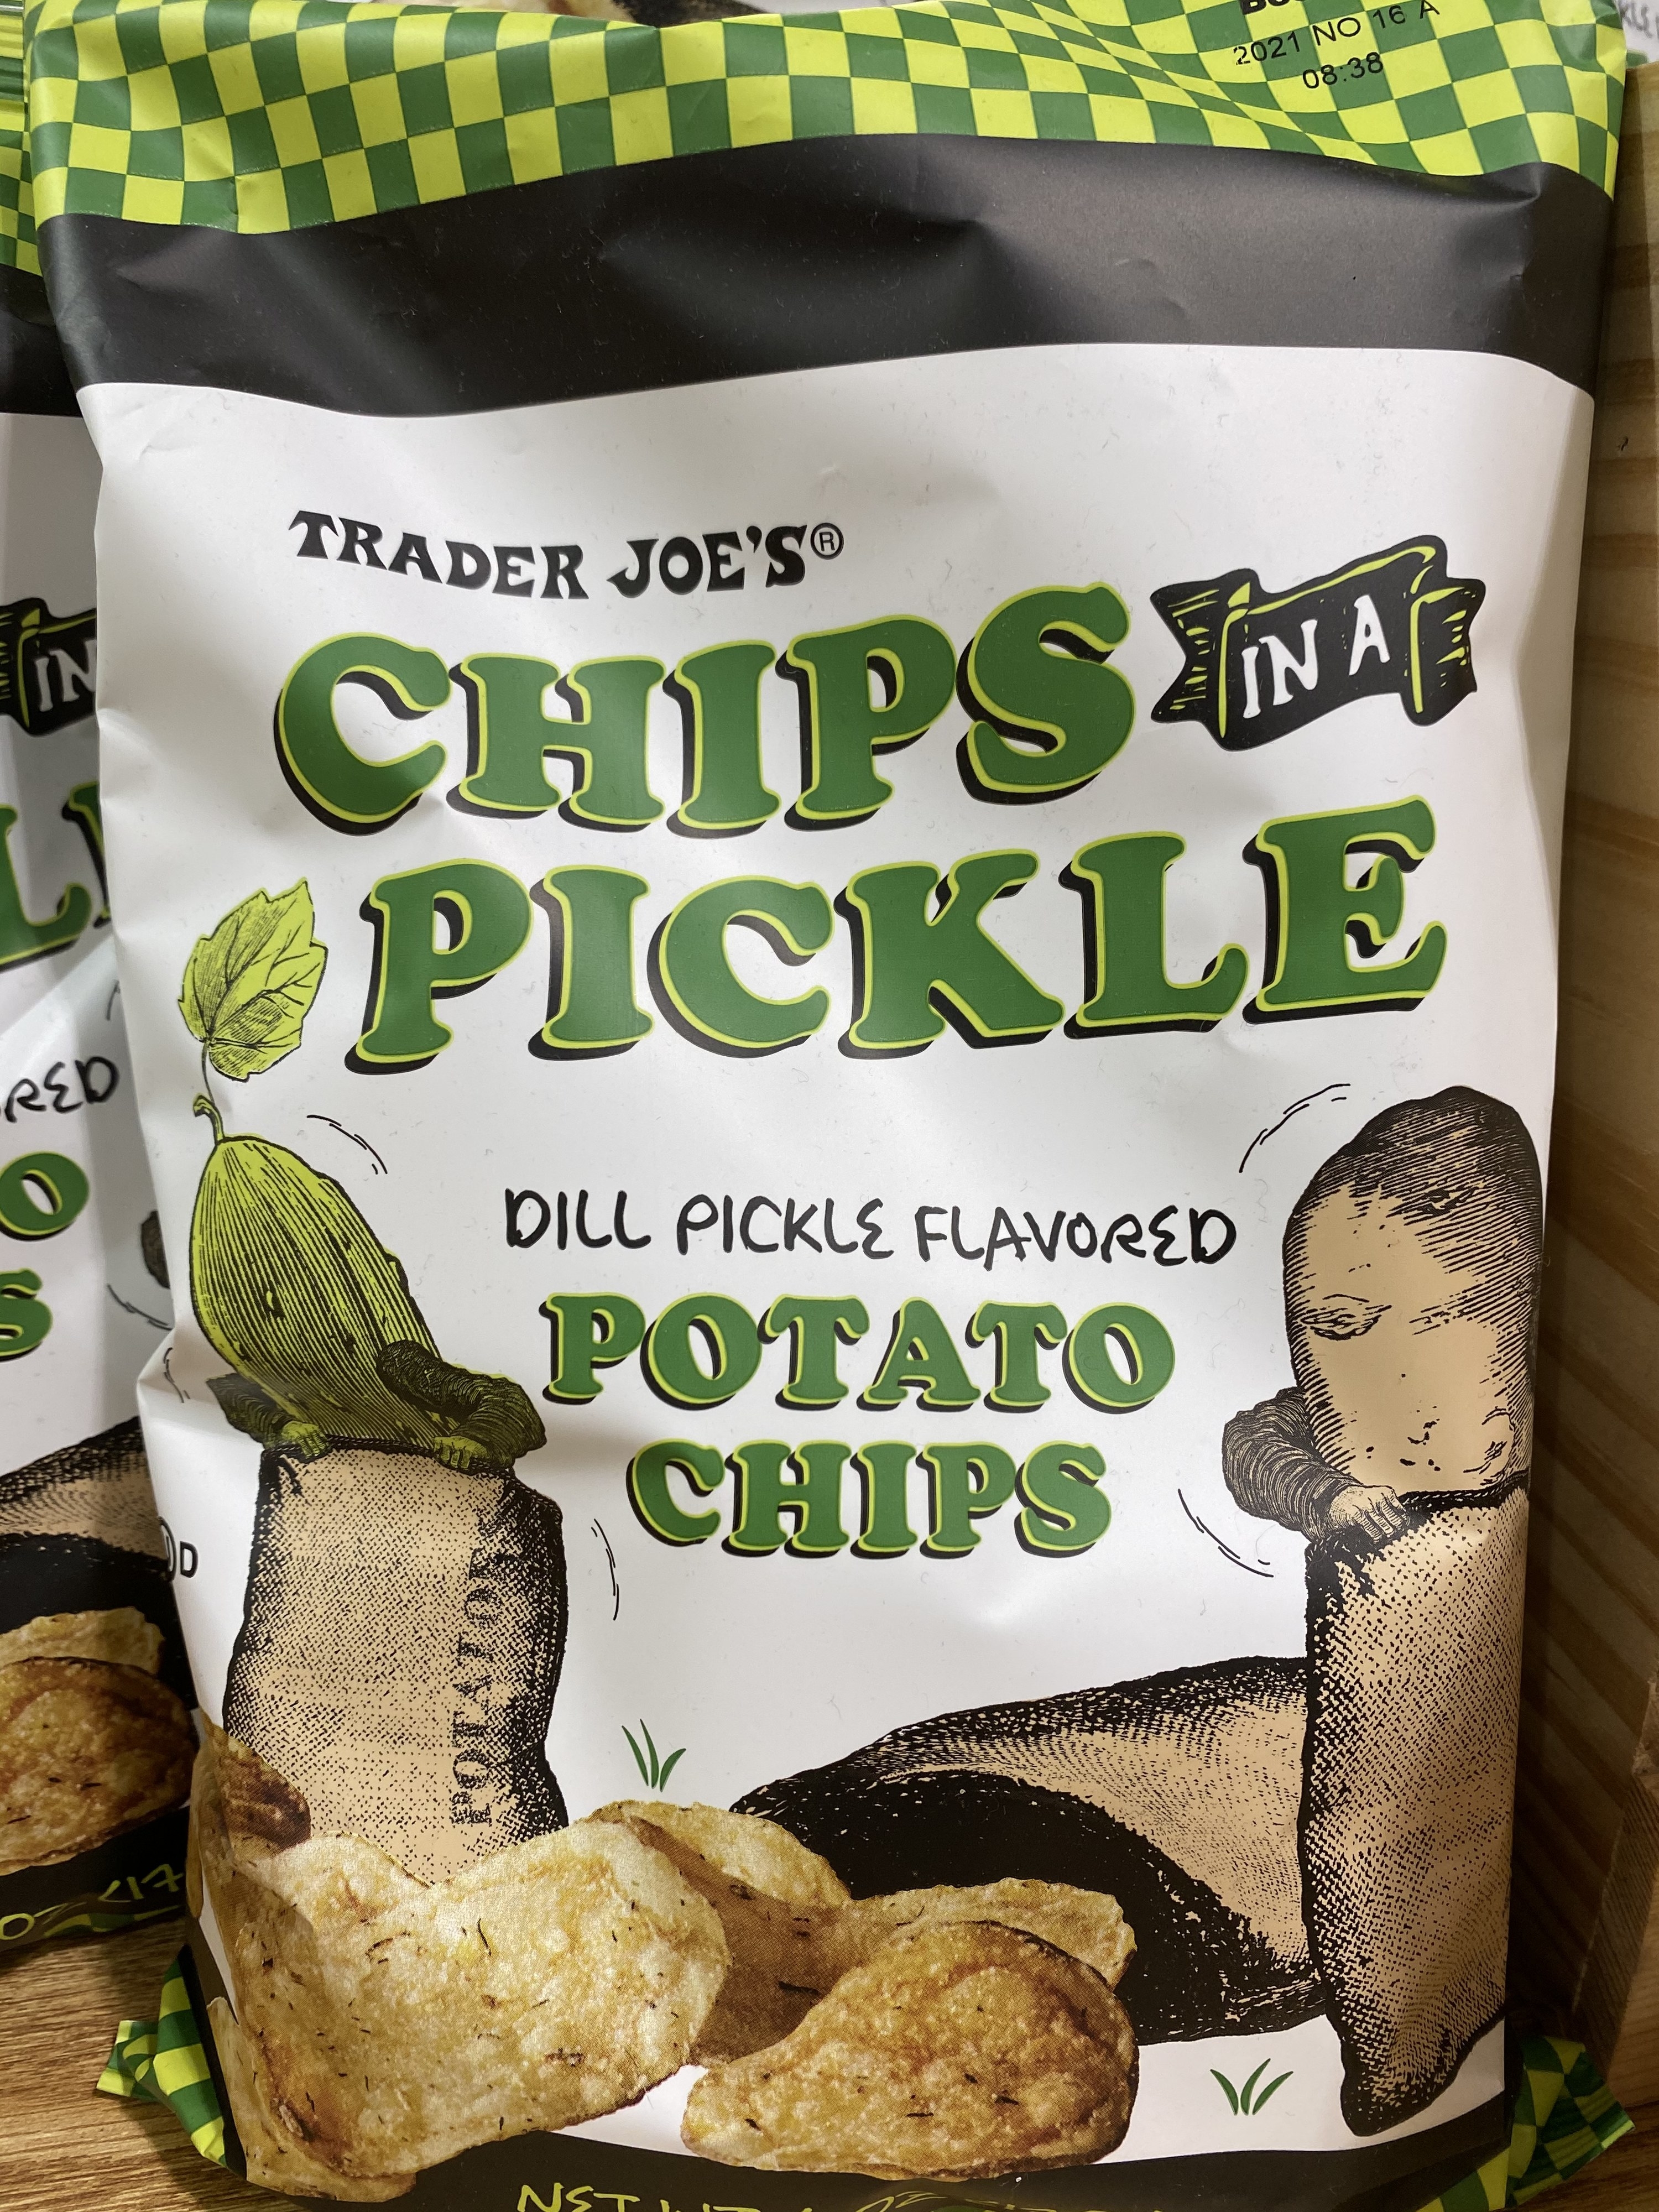 A bag of dill pickle flavored chips.